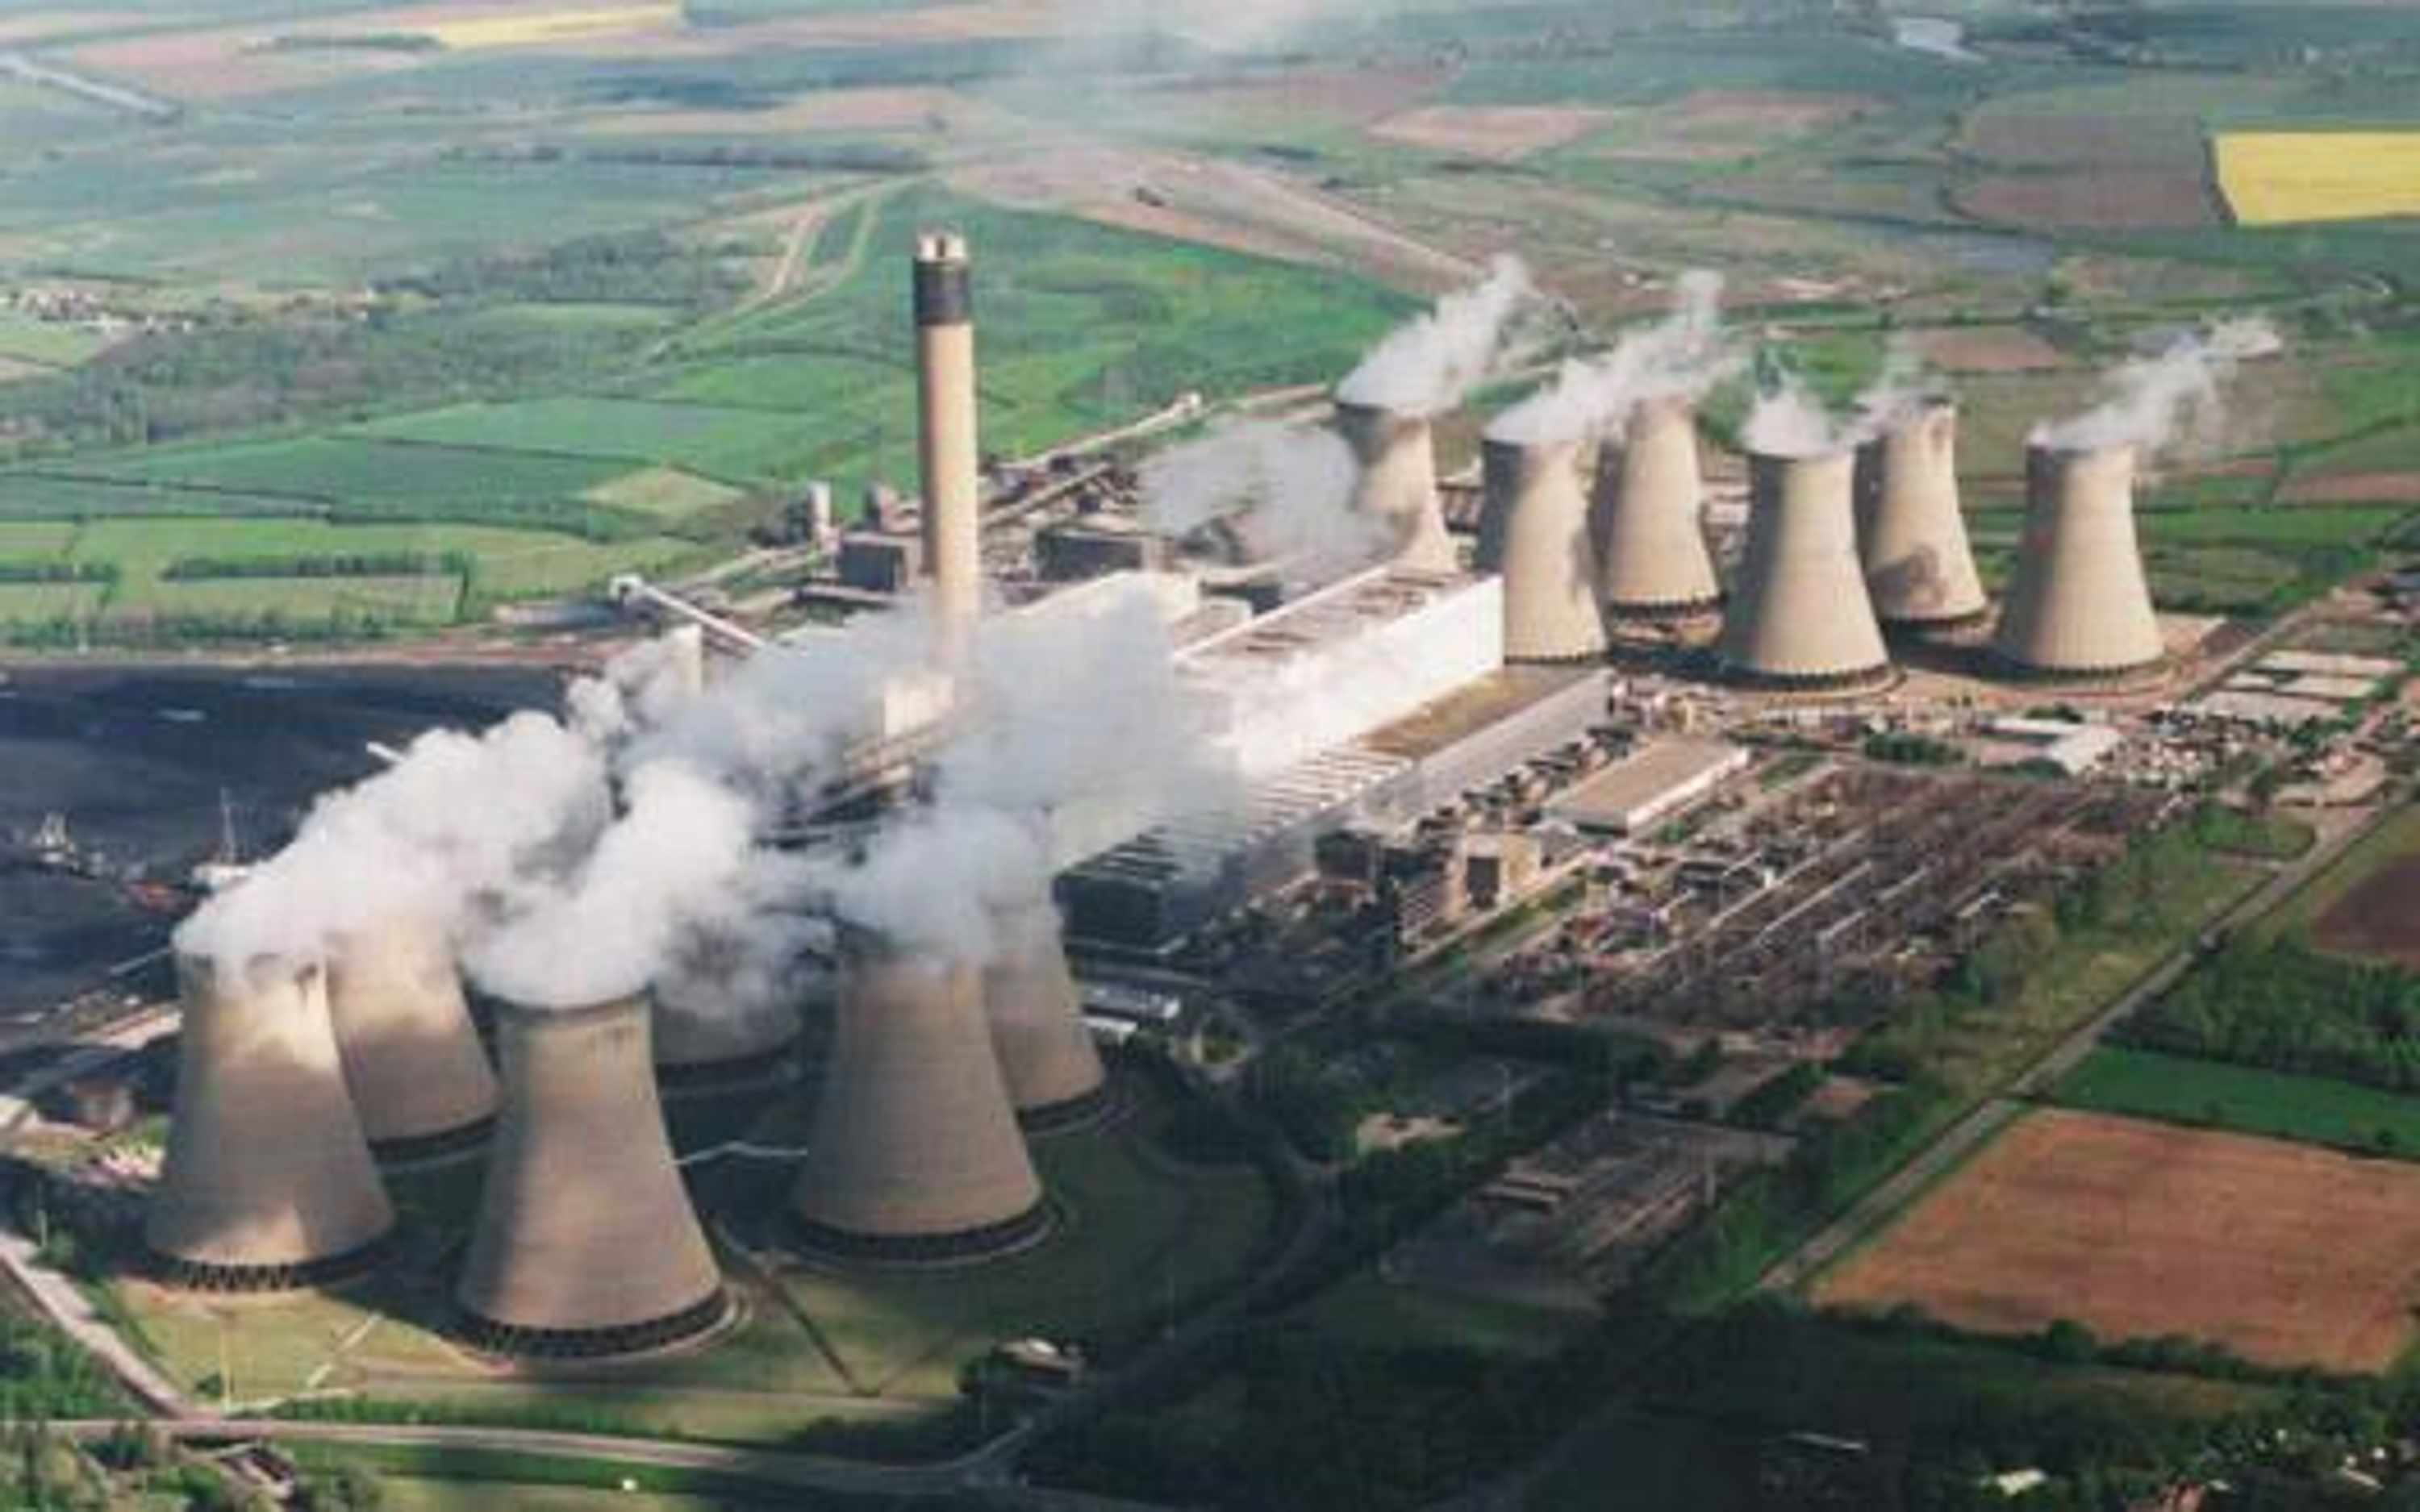 Drax - yes those cooling towers are wasting 70% of the fuel&#39;s energy